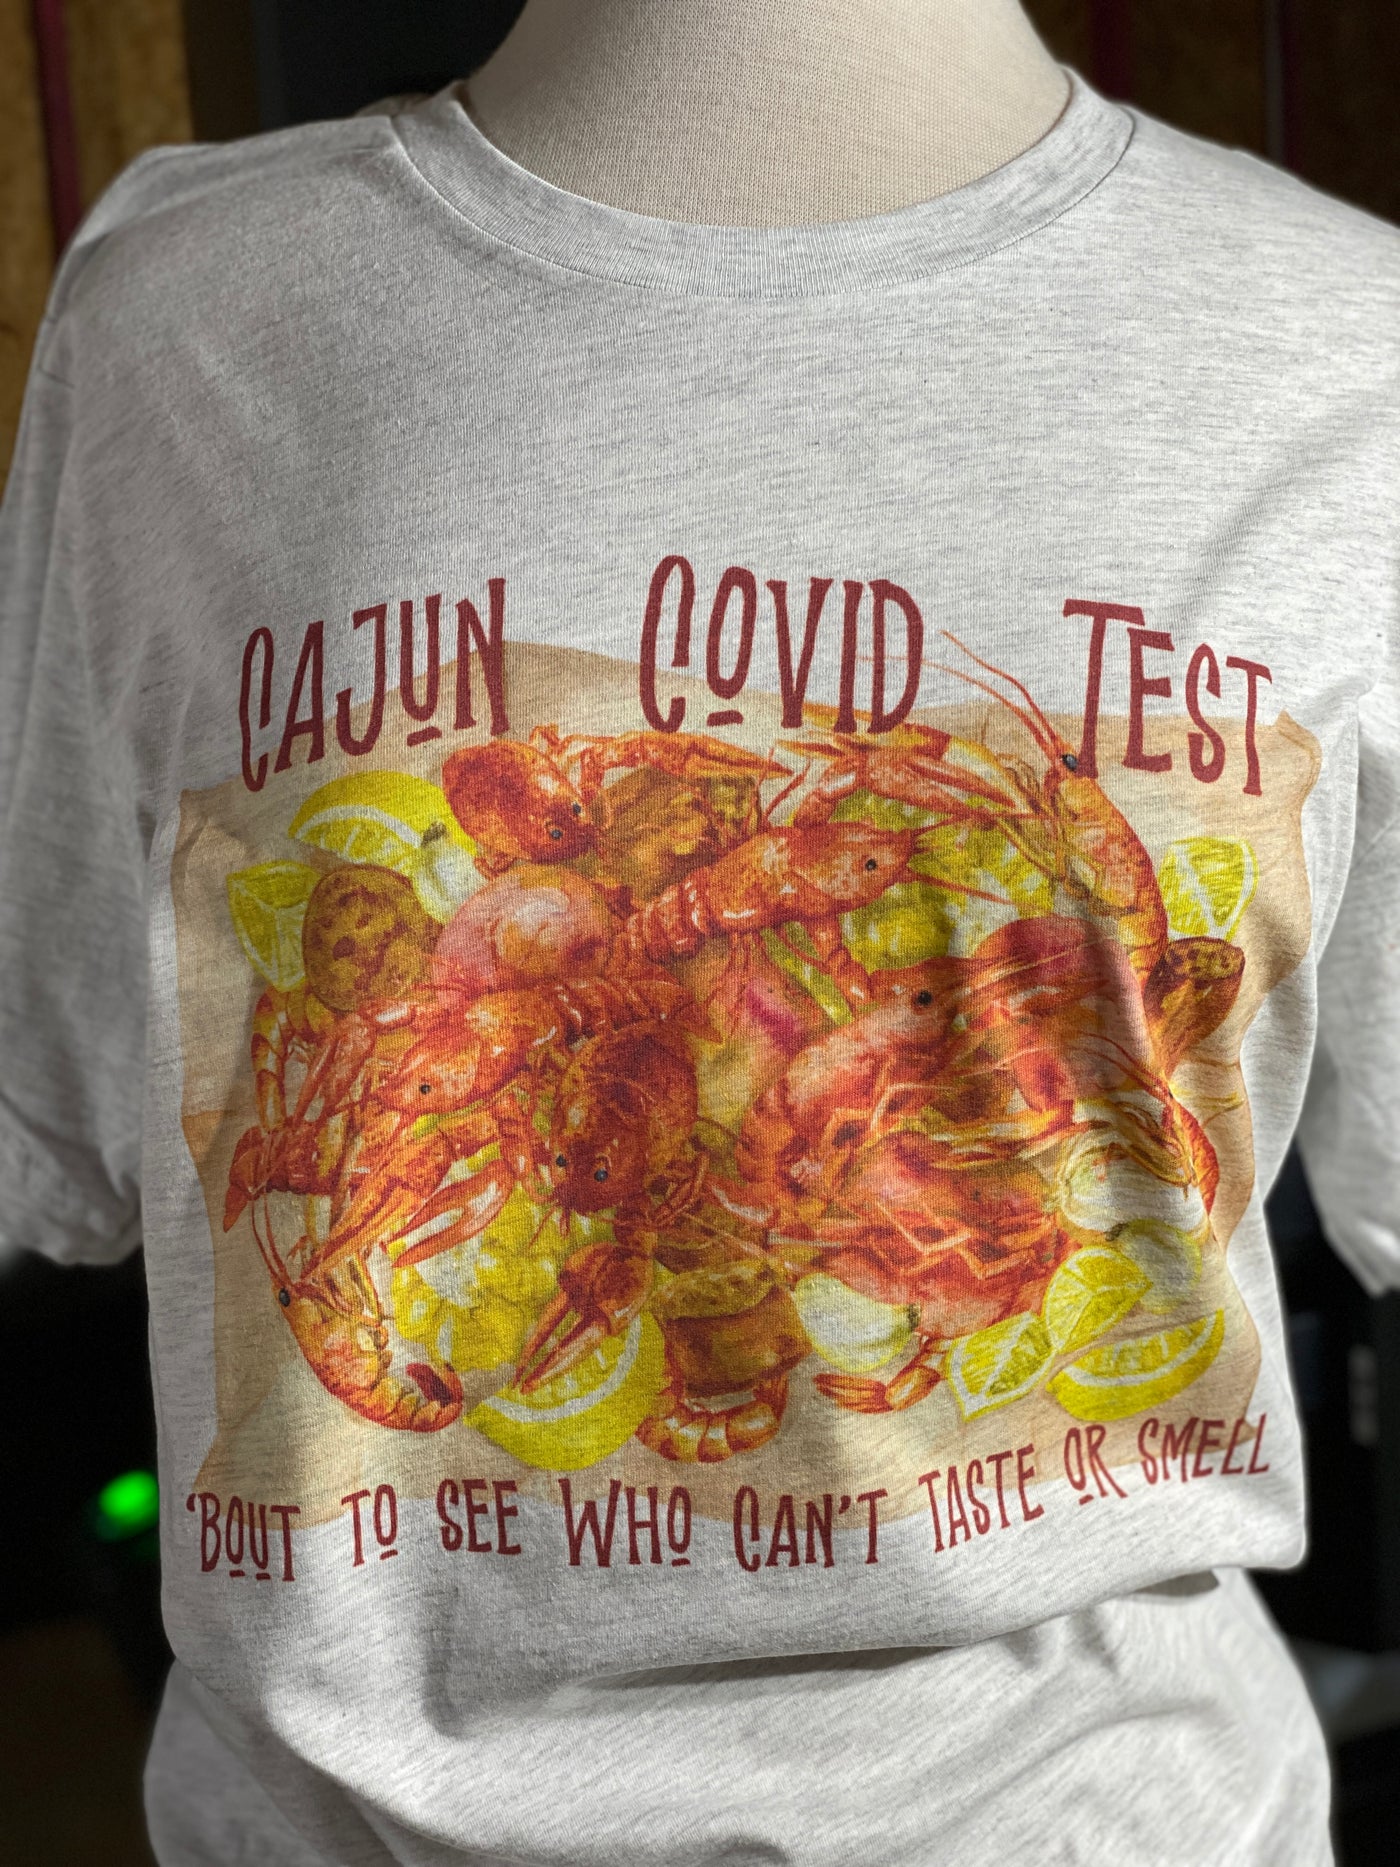 Ash Tee with Graphic. Graphic is a piece of craft paper loaded with crawfish, sausage, potatoes, corn, onions, garlic and lemons. Text above graphic says "Cajun Covid Test" and the text below says "Bout To see who can't taste or smell" All text in red